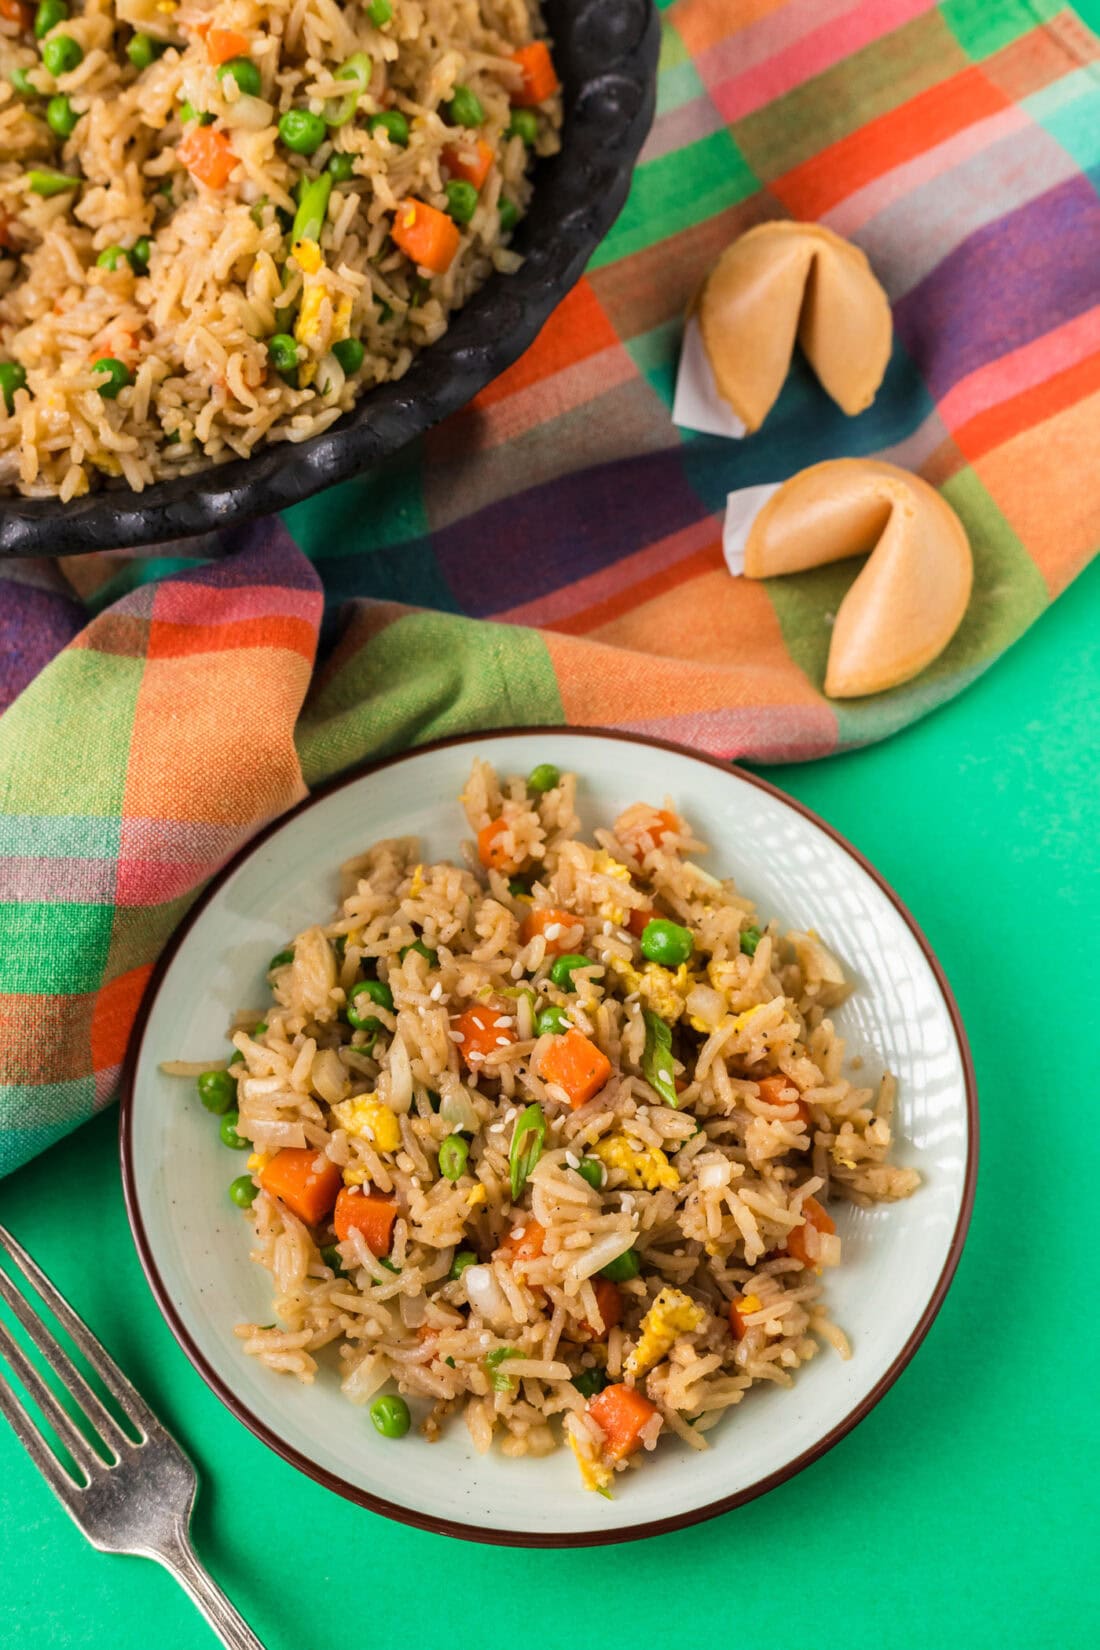 Plate of Vegetable Fried Rice